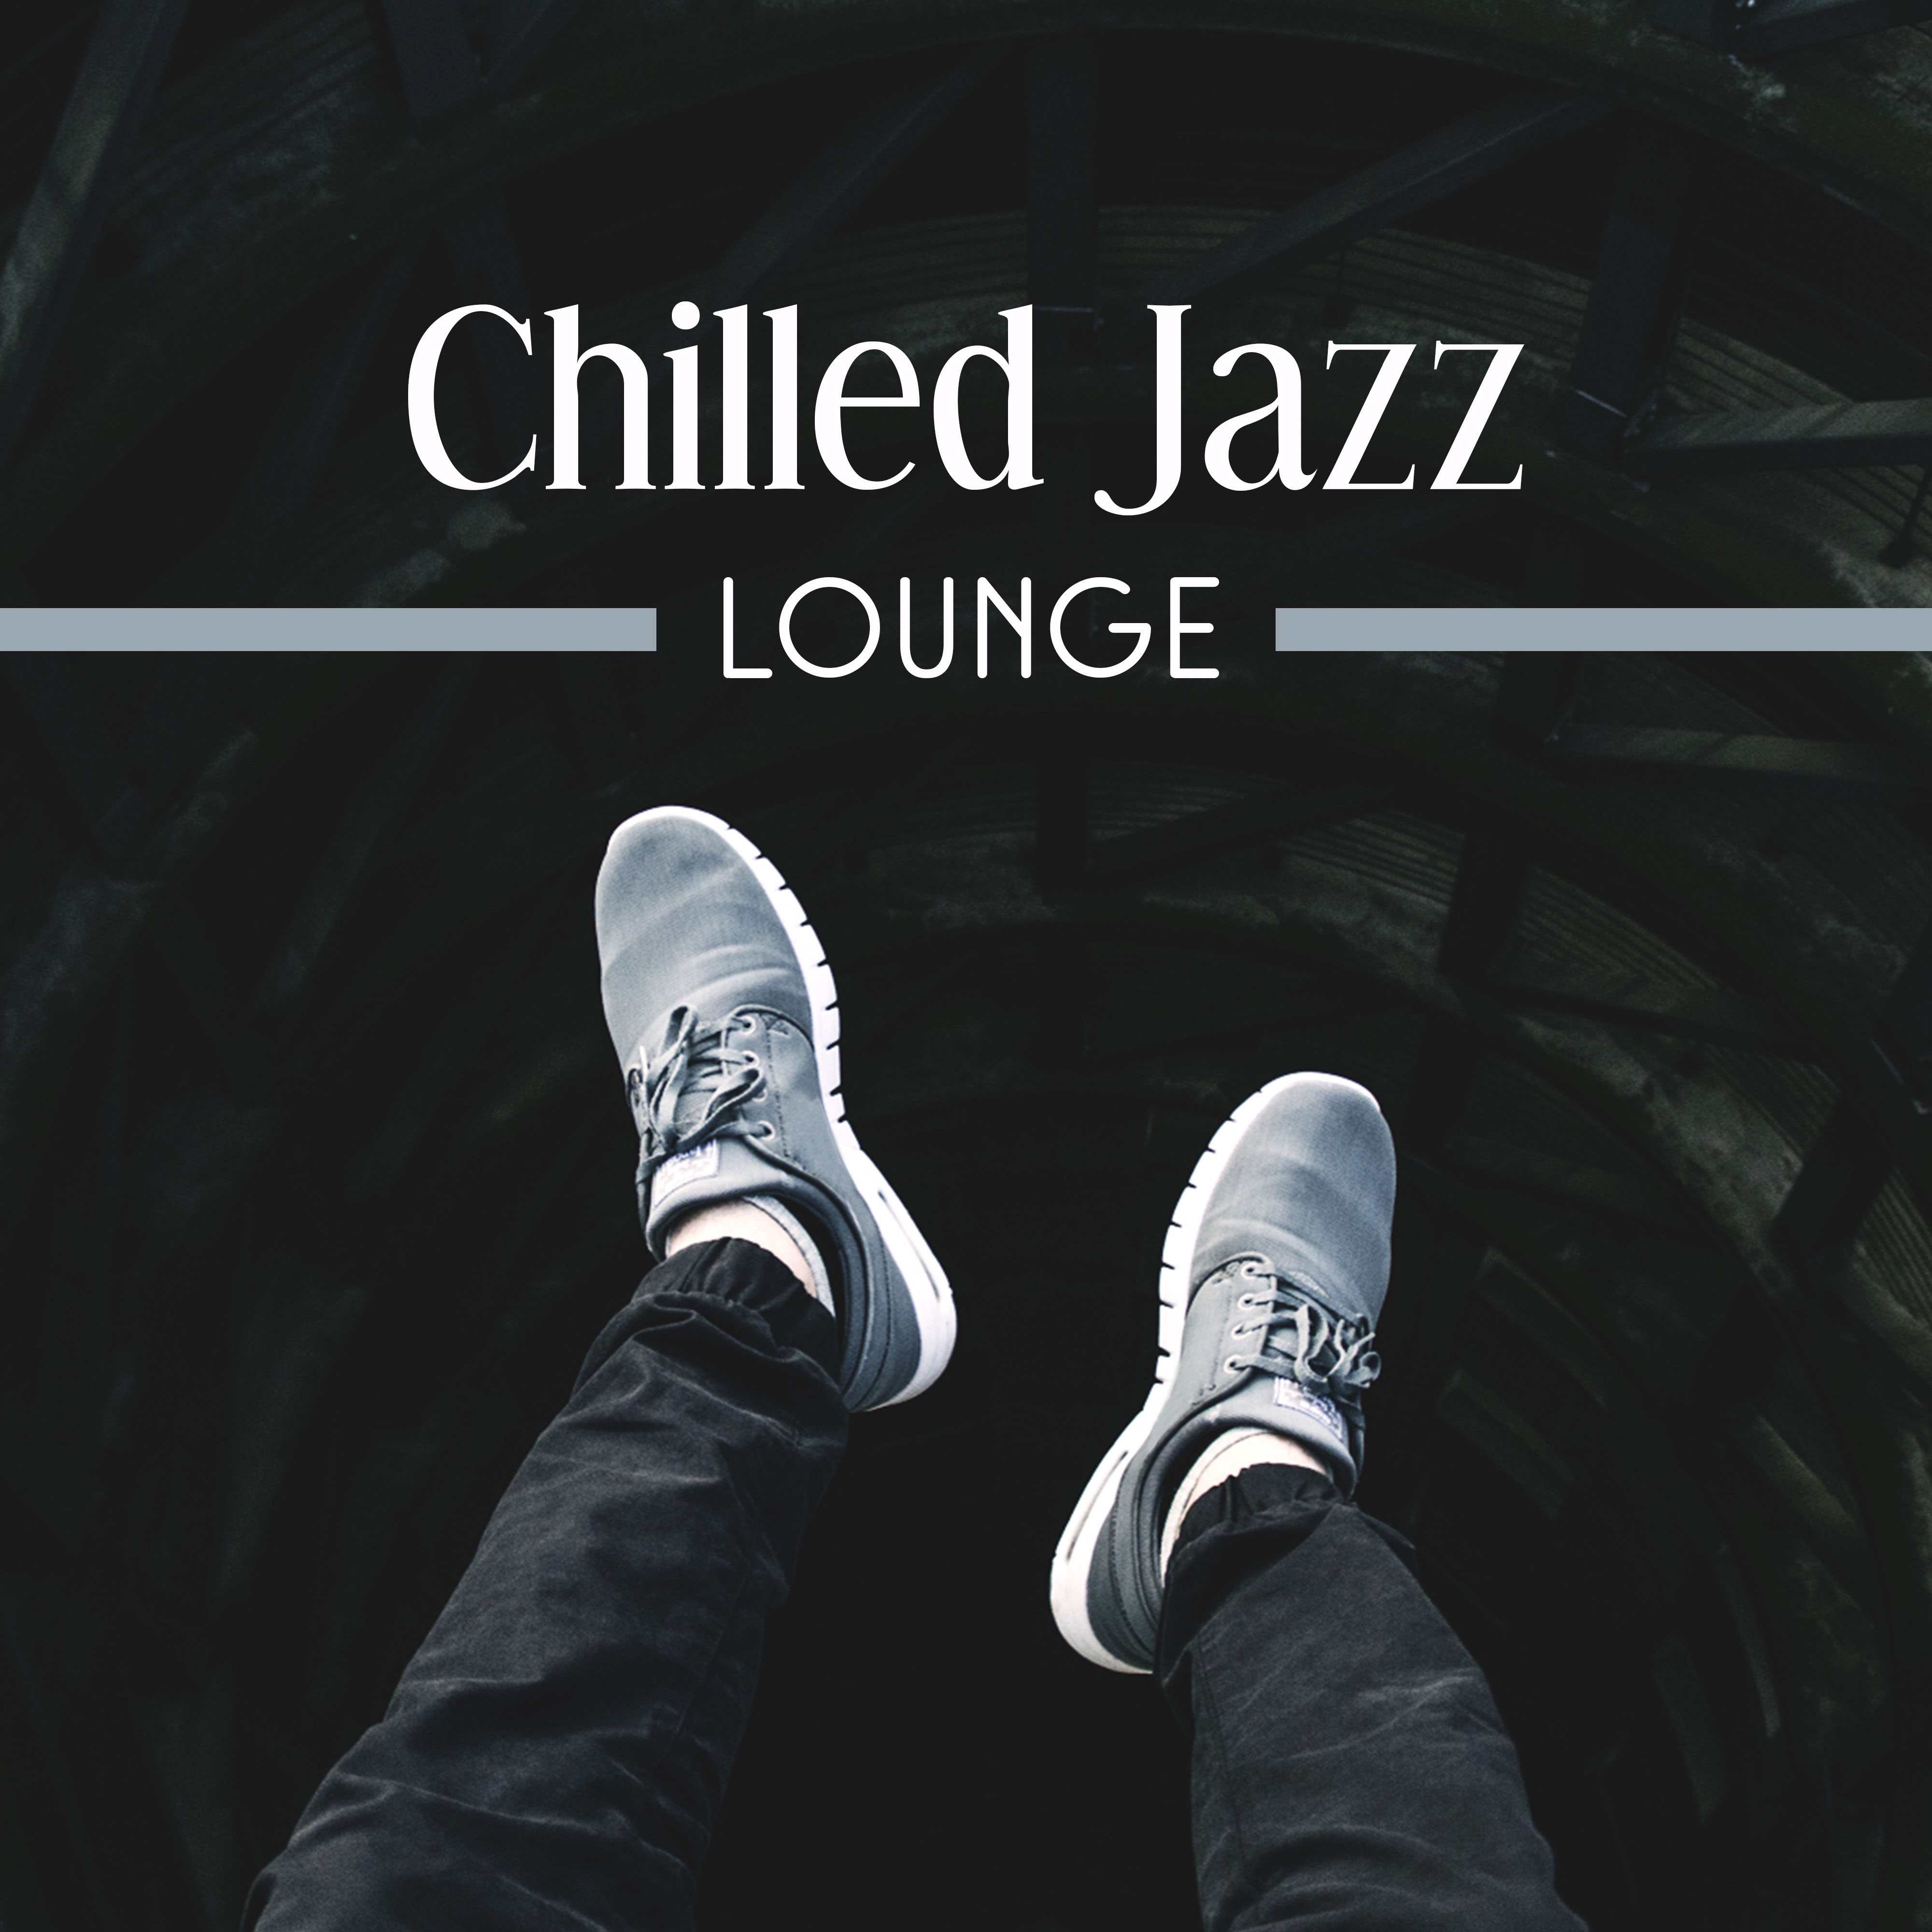 Chilled Jazz Lounge  Calming Sounds of Jazz, Instrumental Music, Night Jazz Club, Piano Relaxation